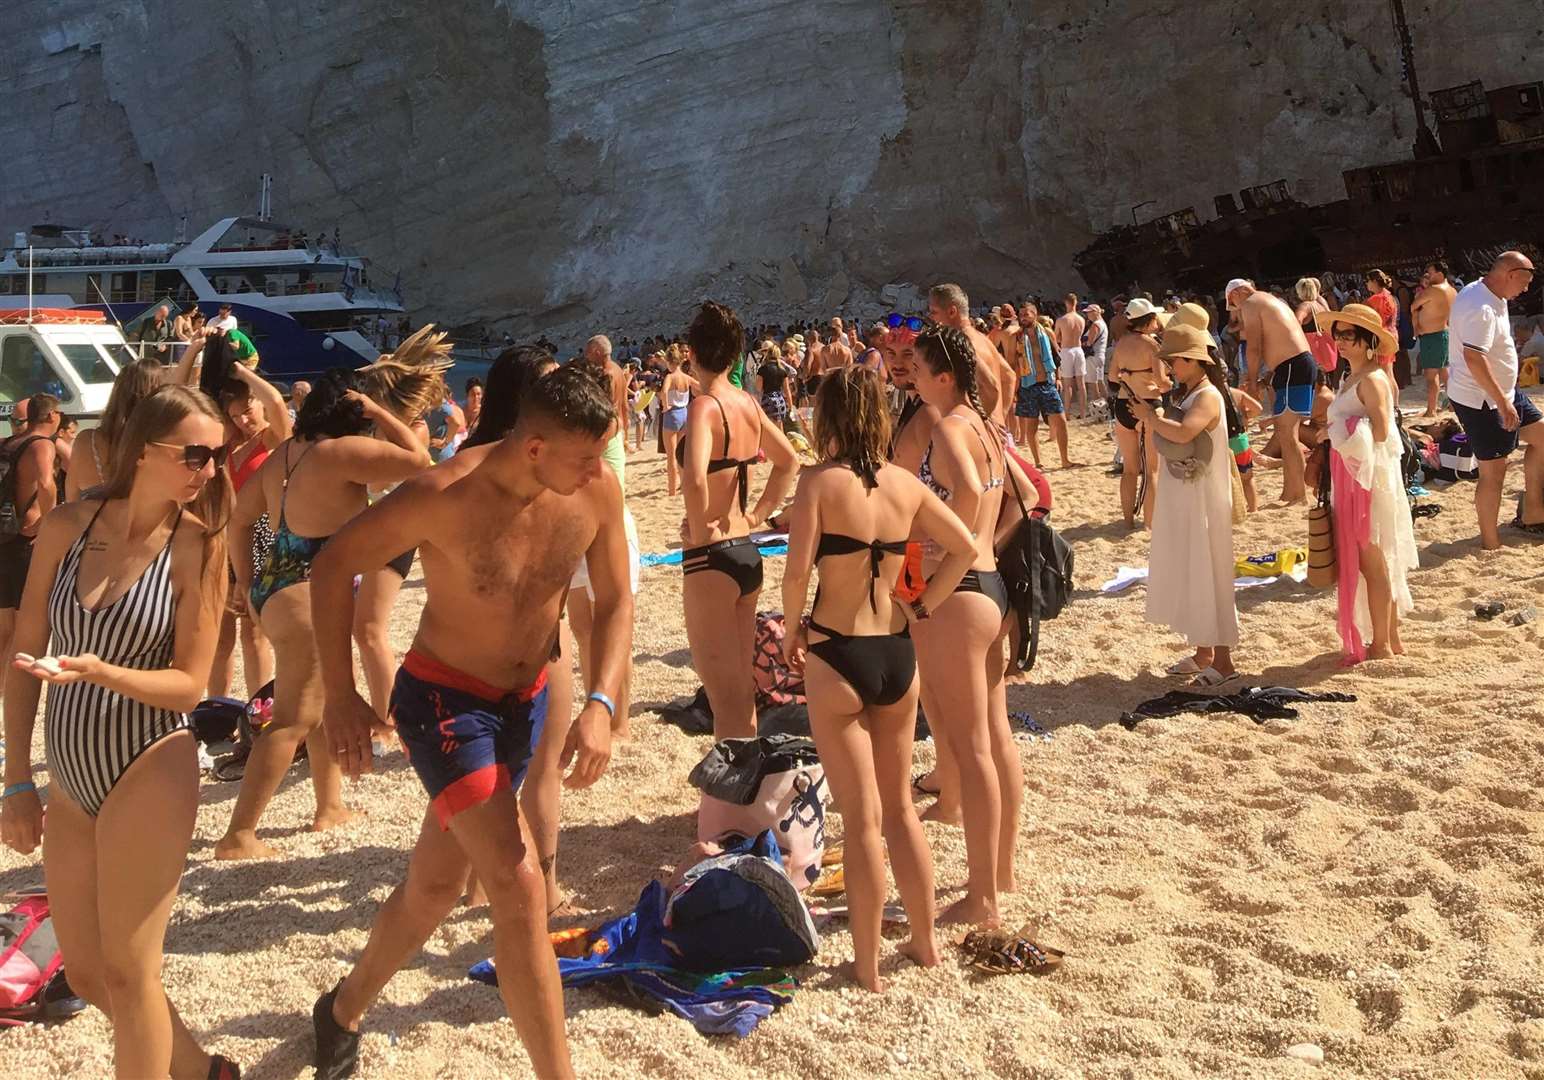 Navagio beach in Zante was packed with holidaymakers when the landslide occurred